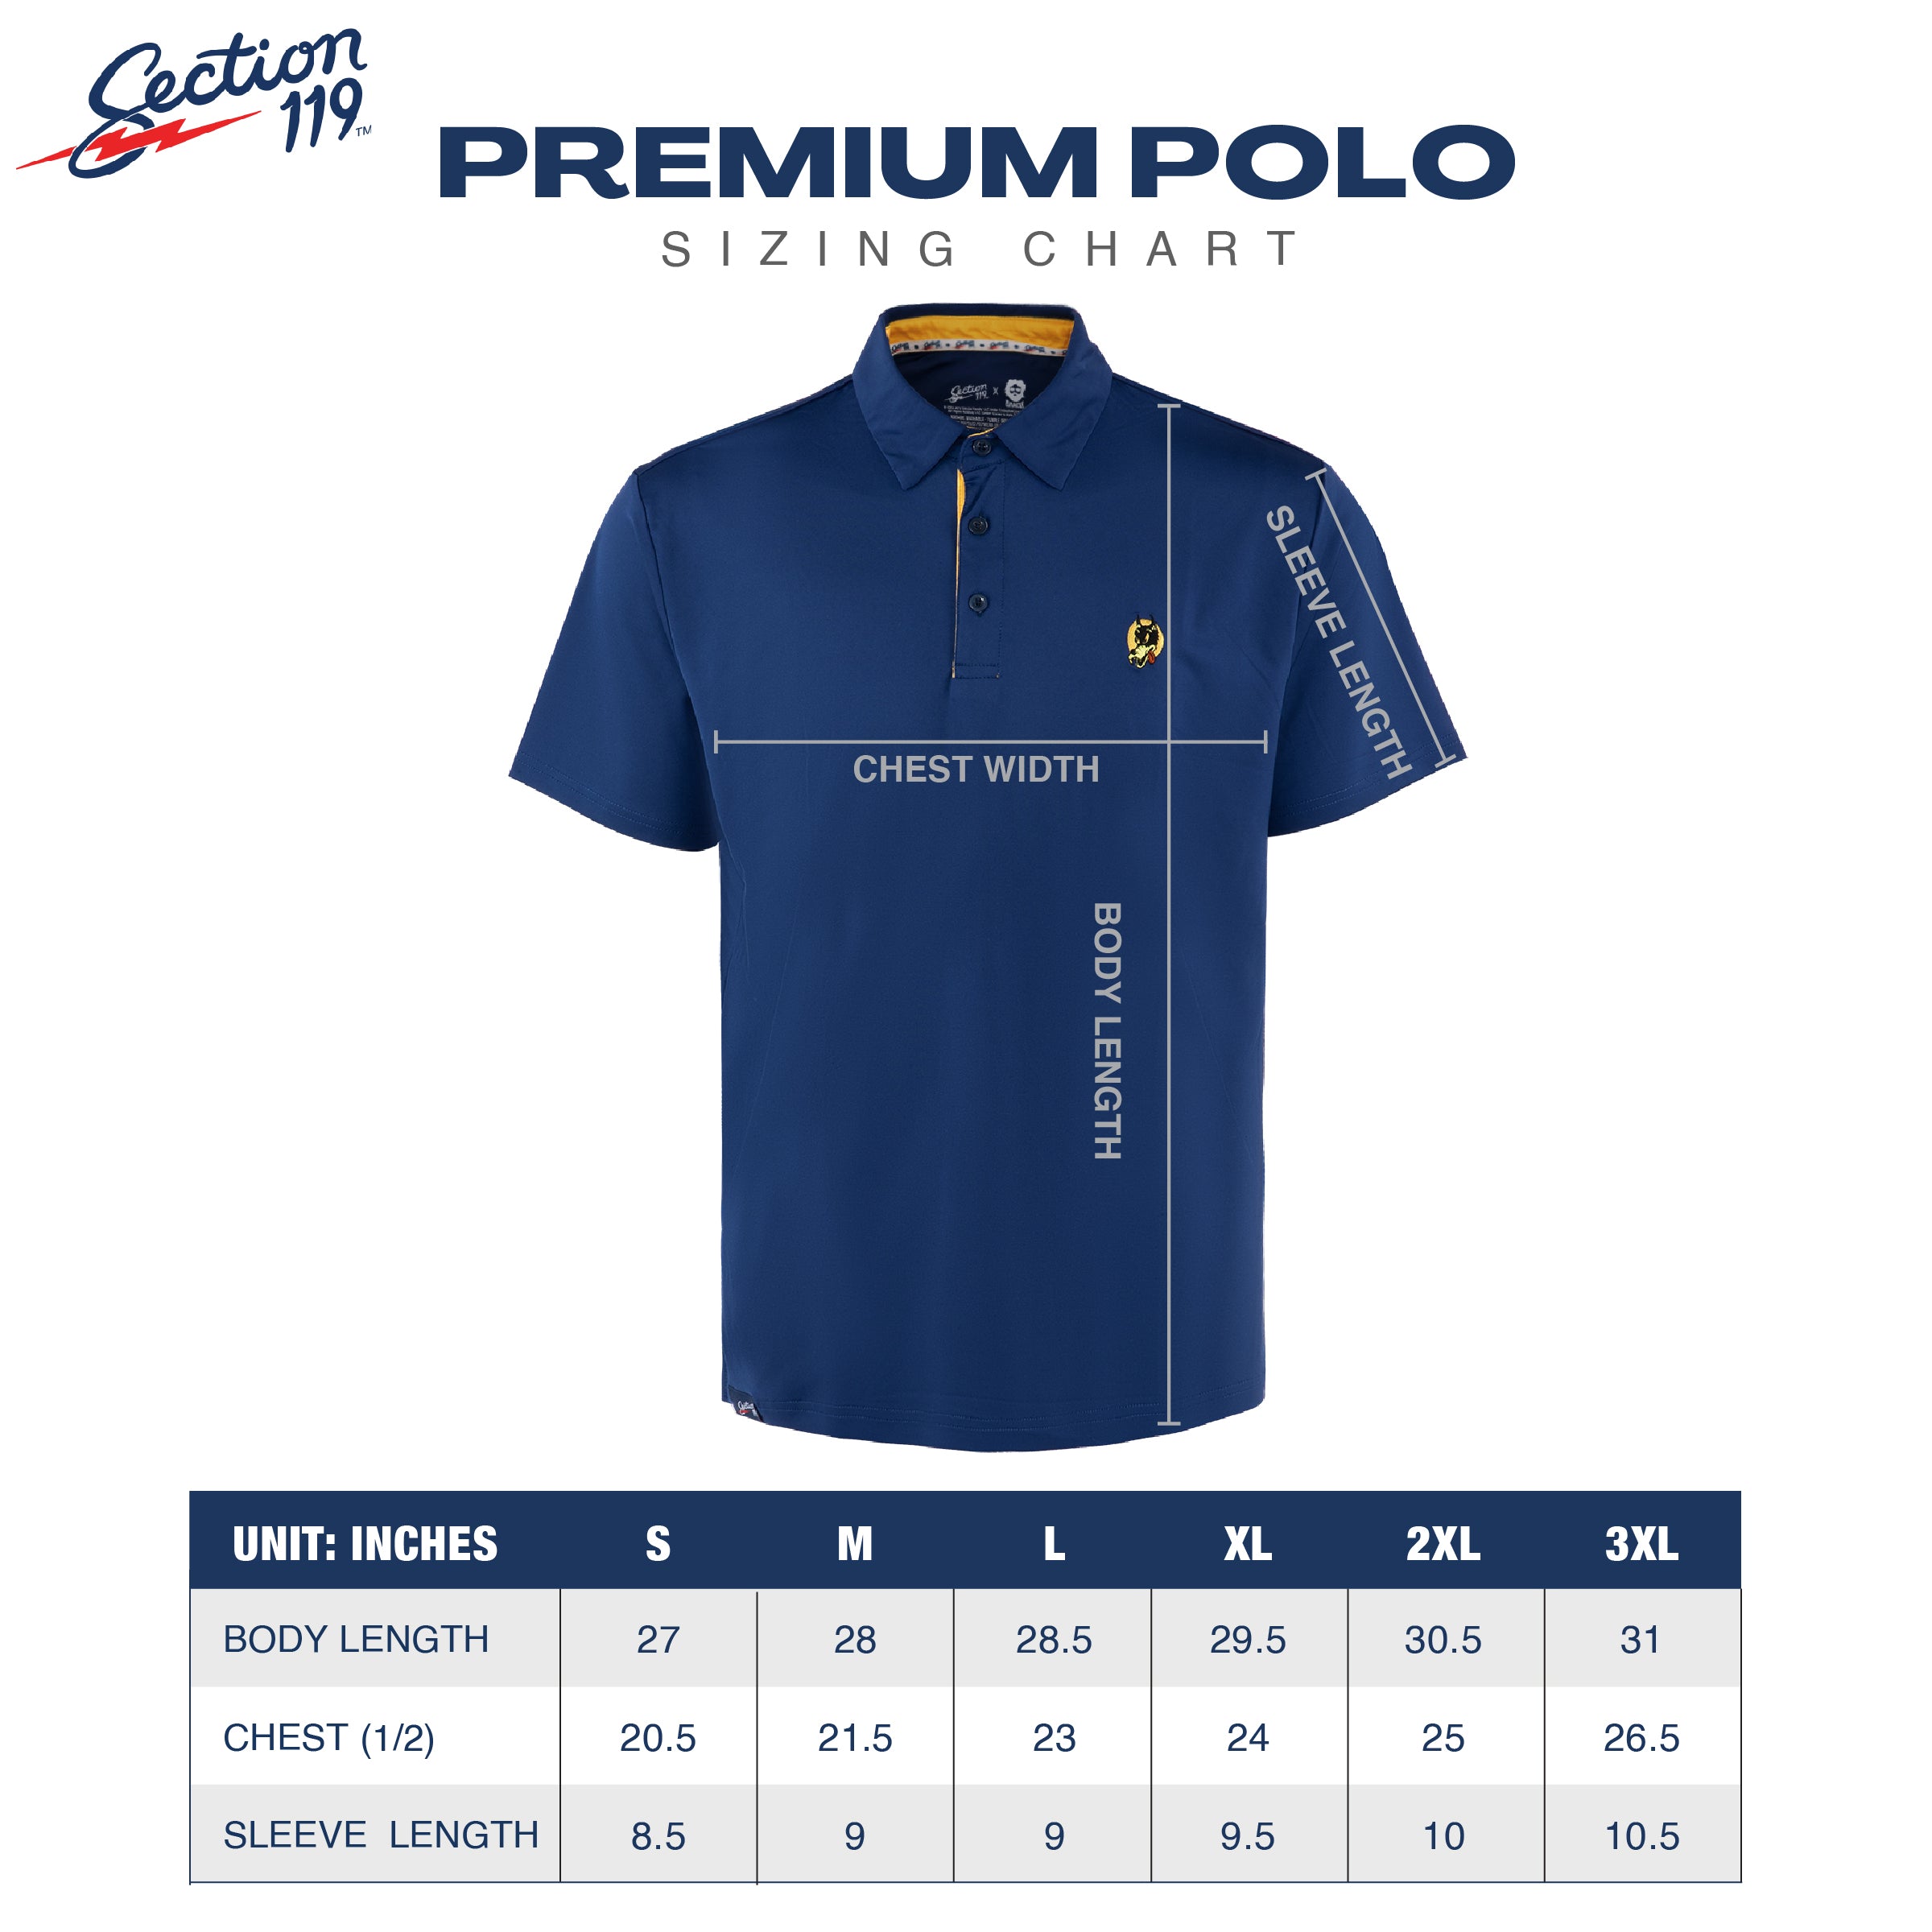 PRE-ORDER Jerry Garcia Premium Navy Wolf Performance Polo - Section 119